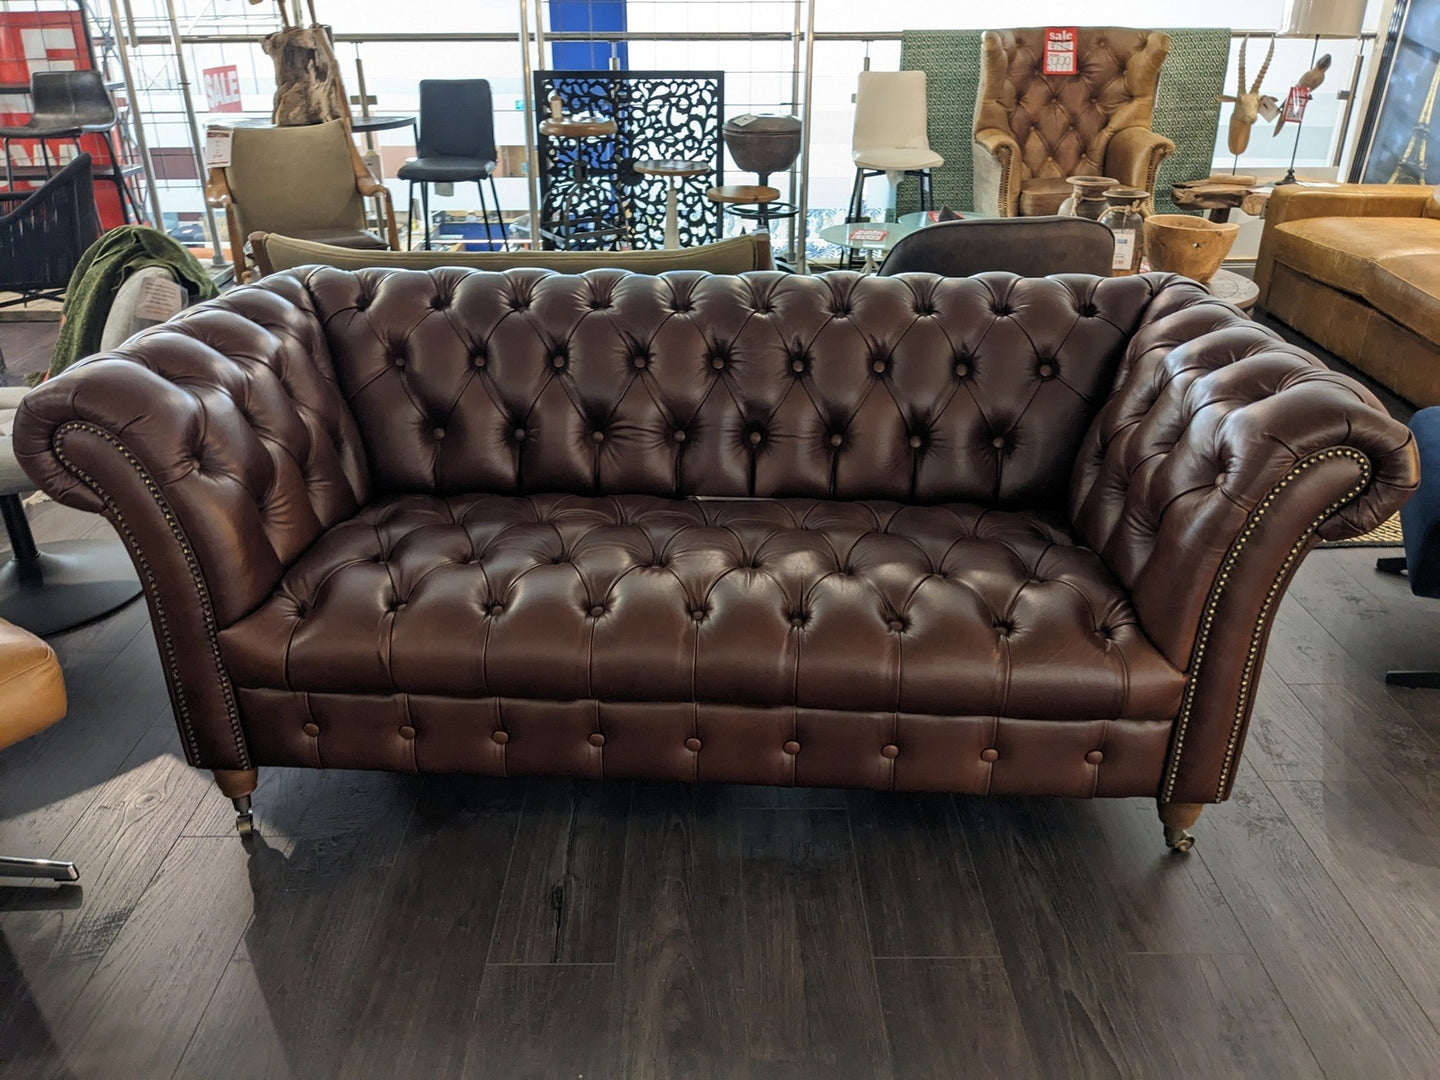 Vintage Chester 2 Seater Sofa